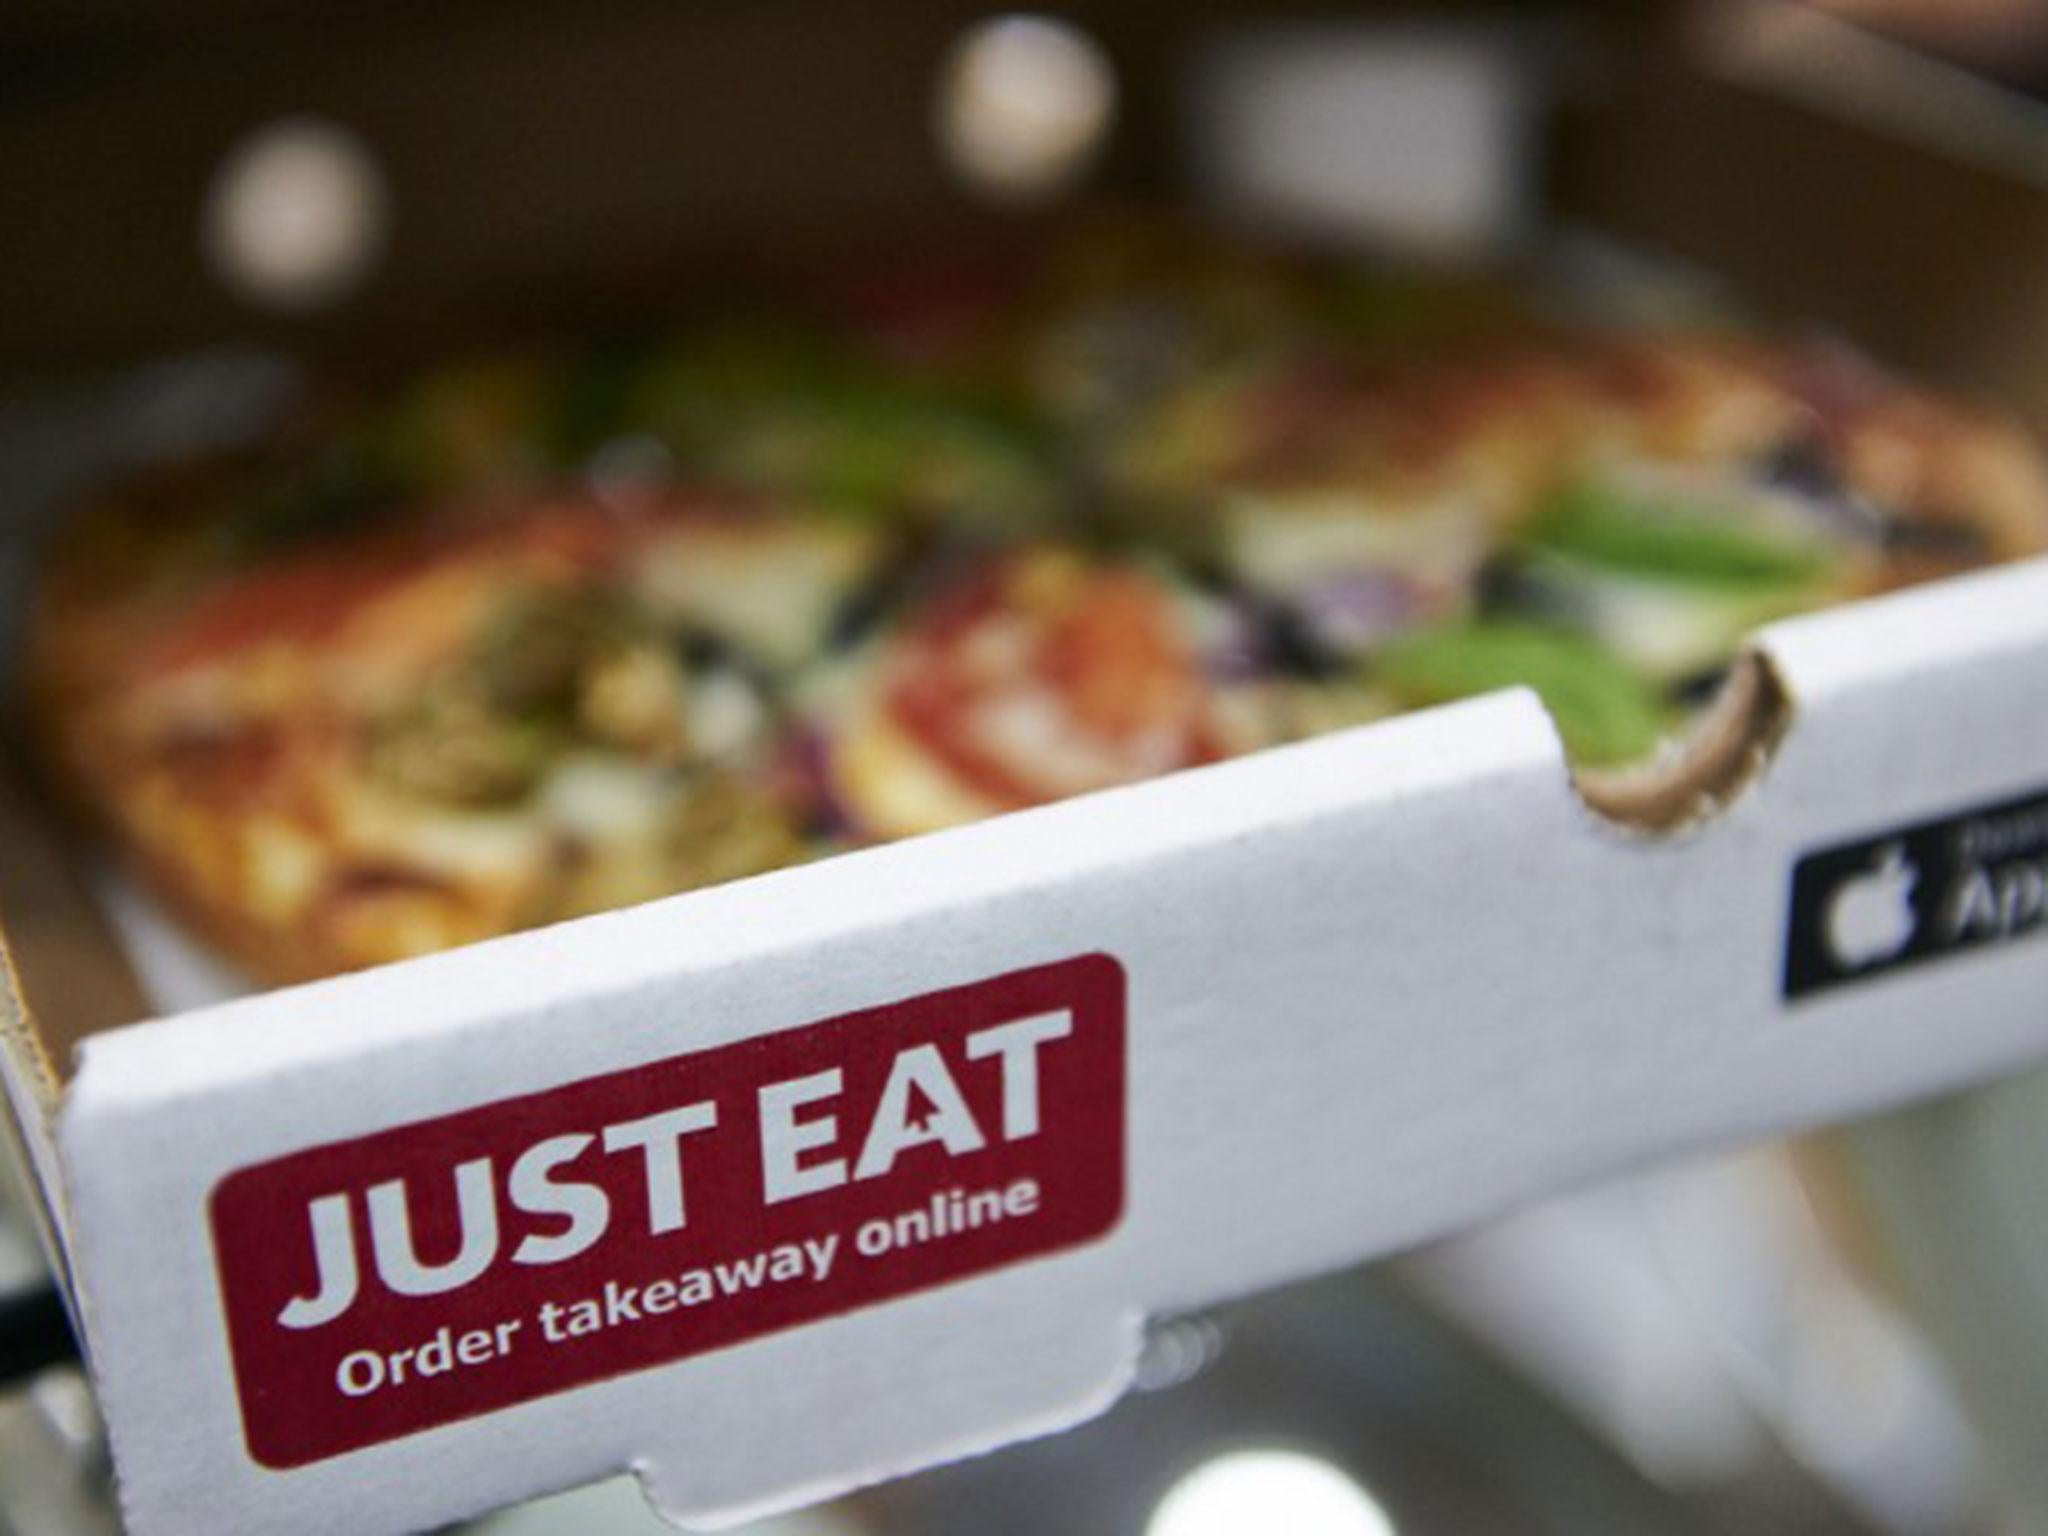 A Just Eat pizza box